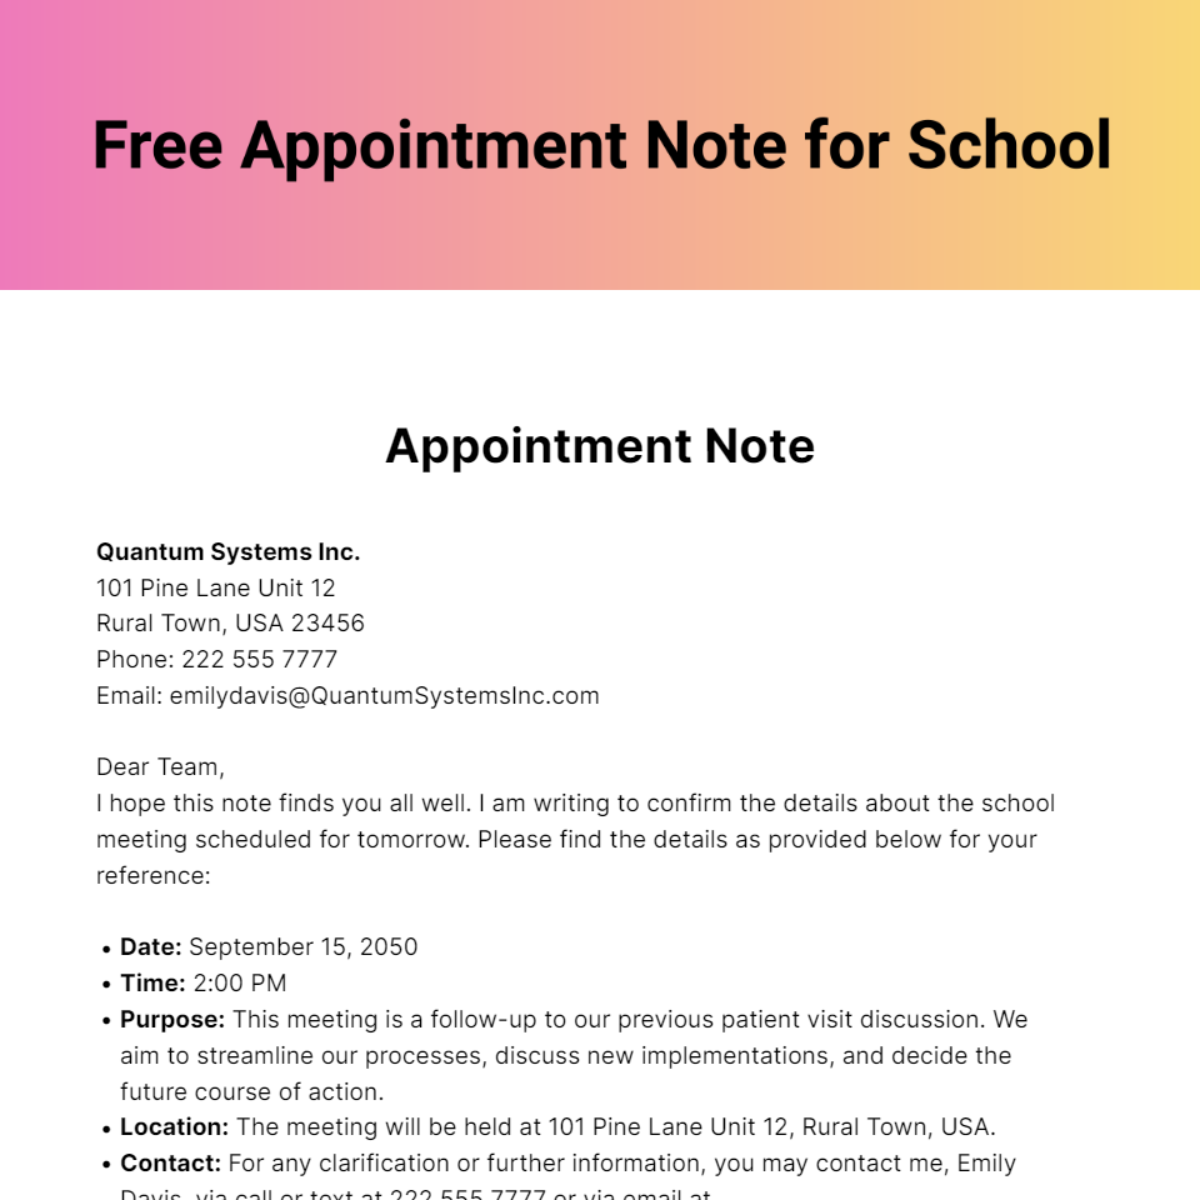 Free Appointment Note for School Template